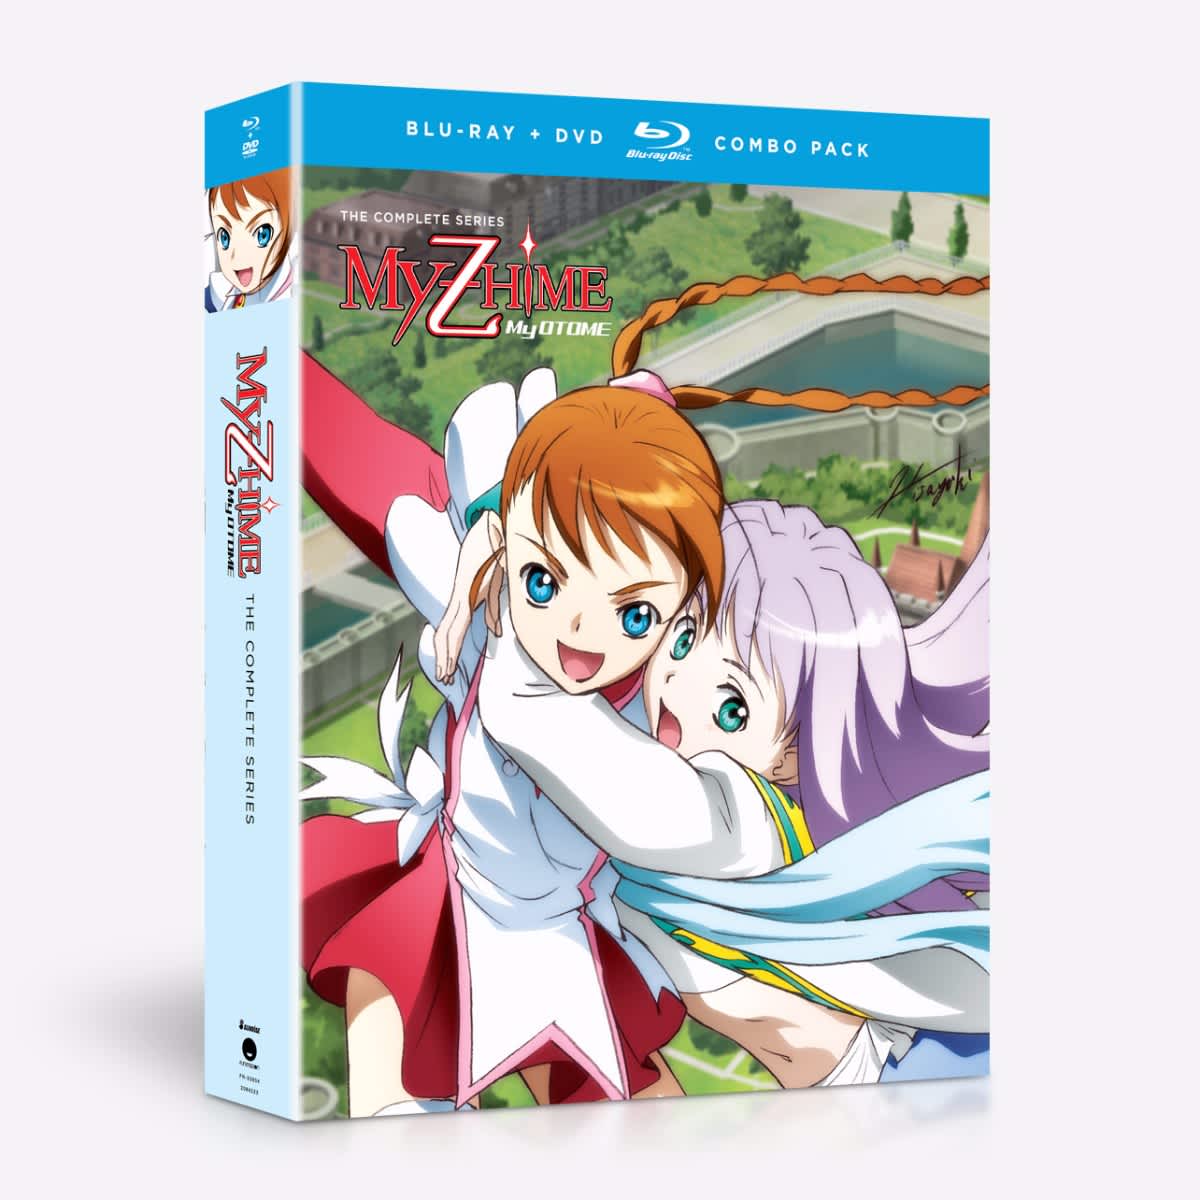 My Otome - The Complete Series - Blu-ray + DVD | Crunchyroll Store